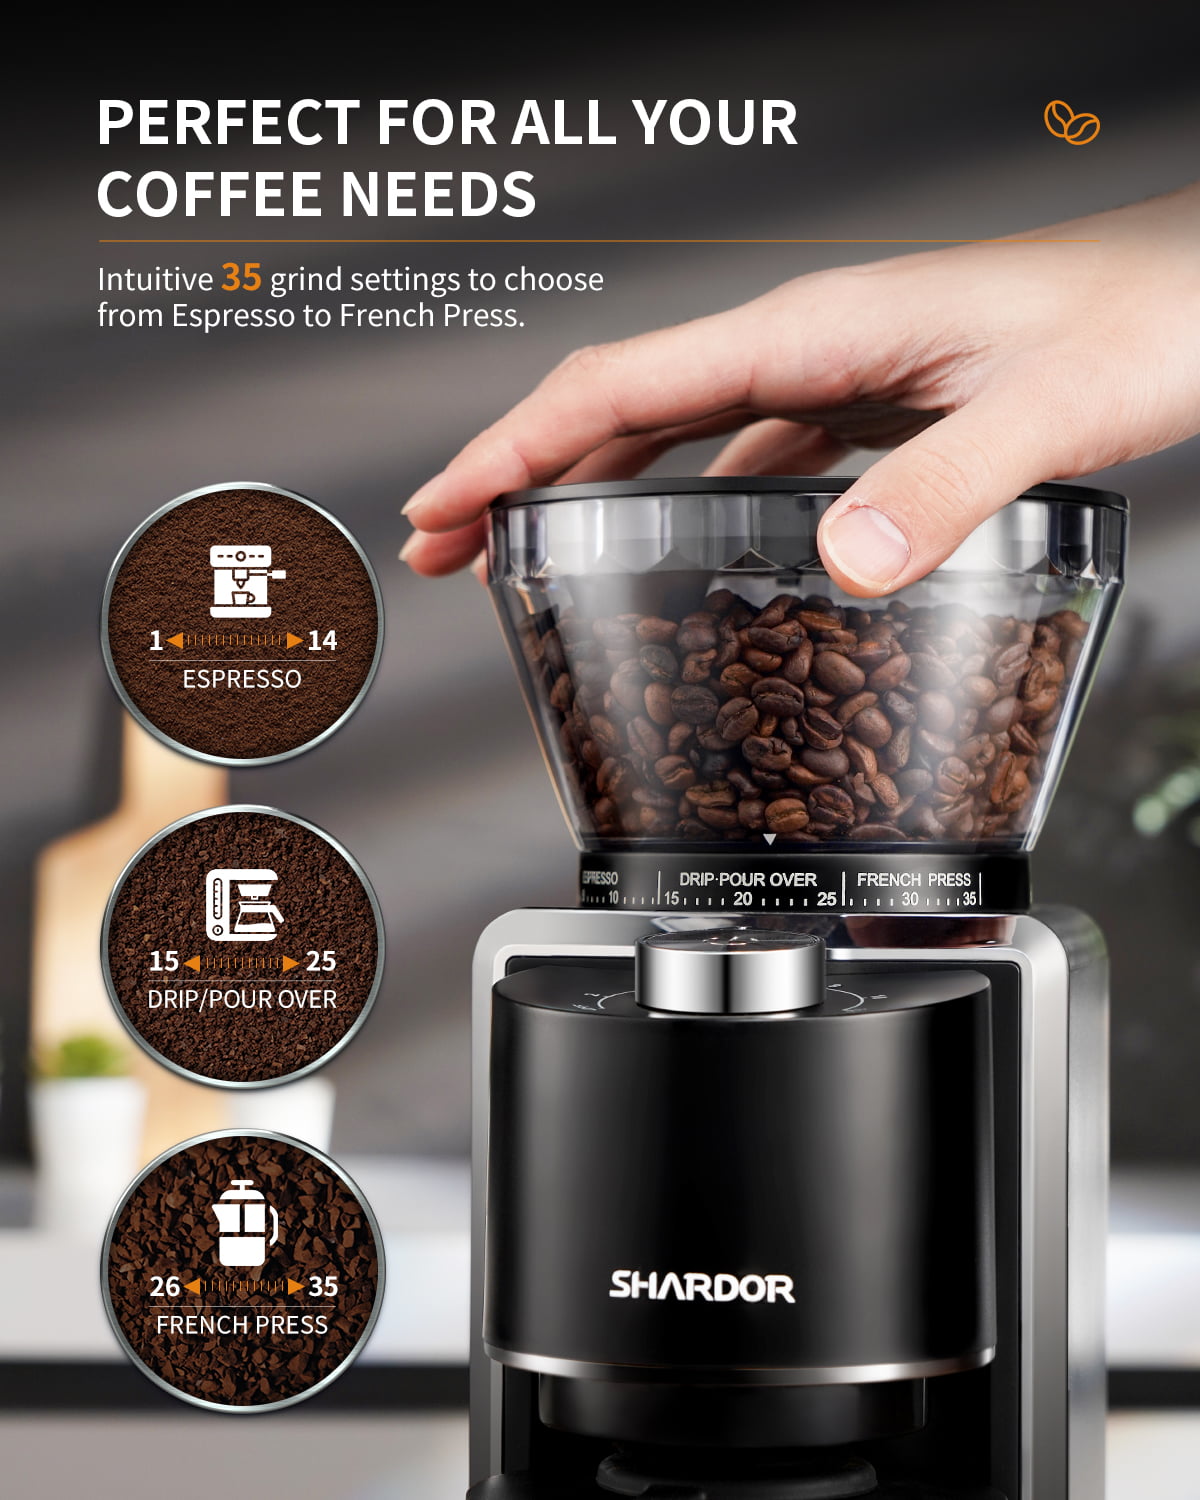 SHARDOR CG018 Conical Burr Coffee Grinder for Espresso,Touchscreen Electric  Adjustable ,51 Precise Settings, Black. 